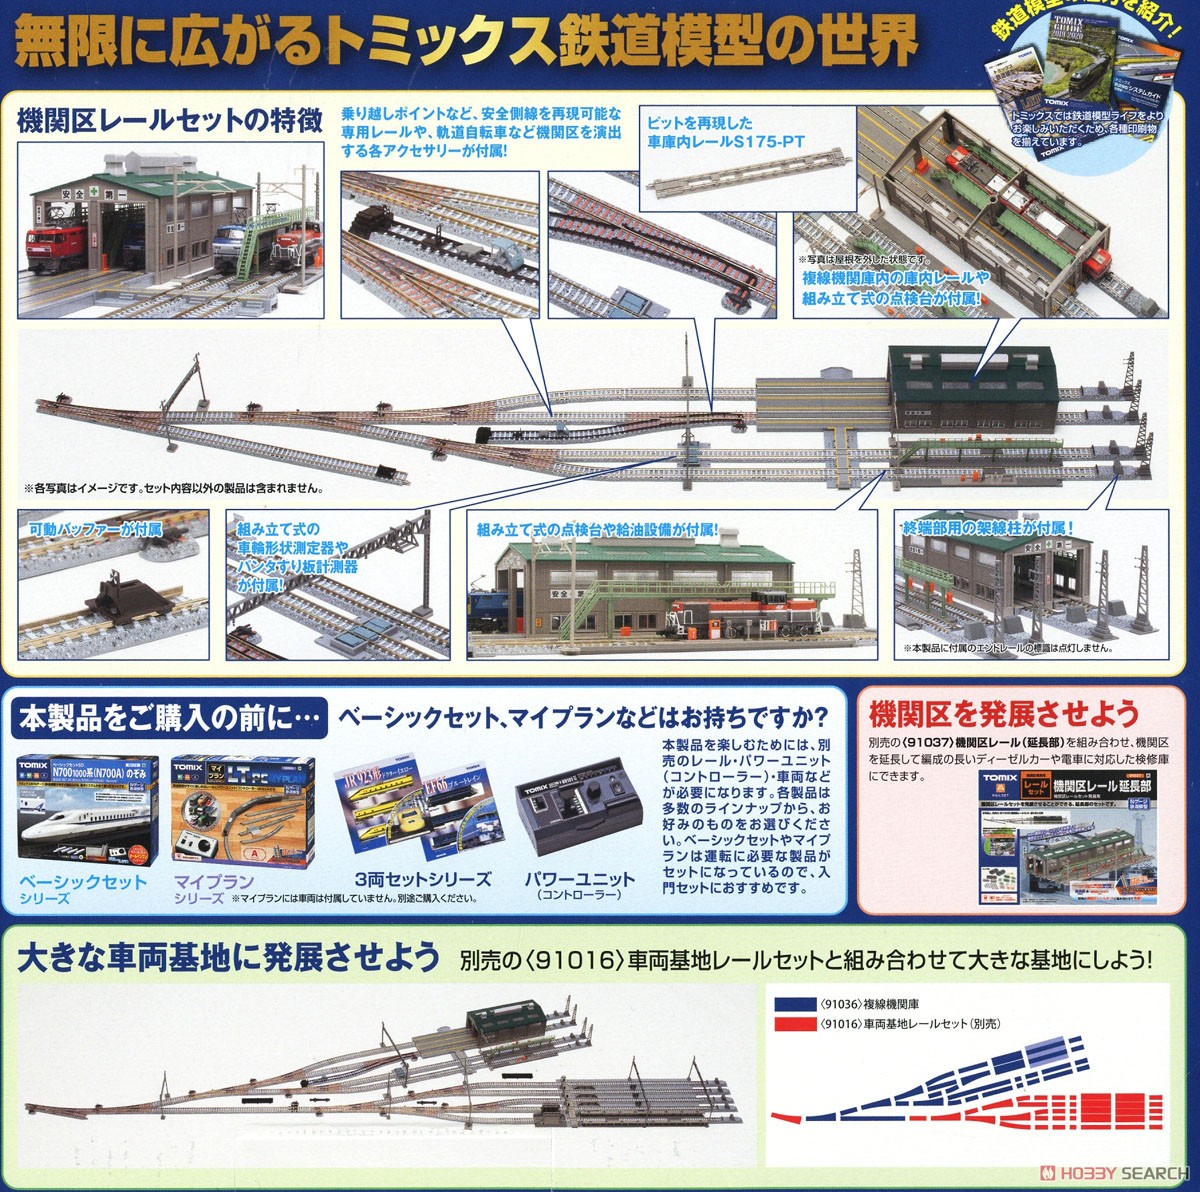 Fine Track 機関区レールセット [手軽に発展 レールセット] (鉄道模型) その他の画像10